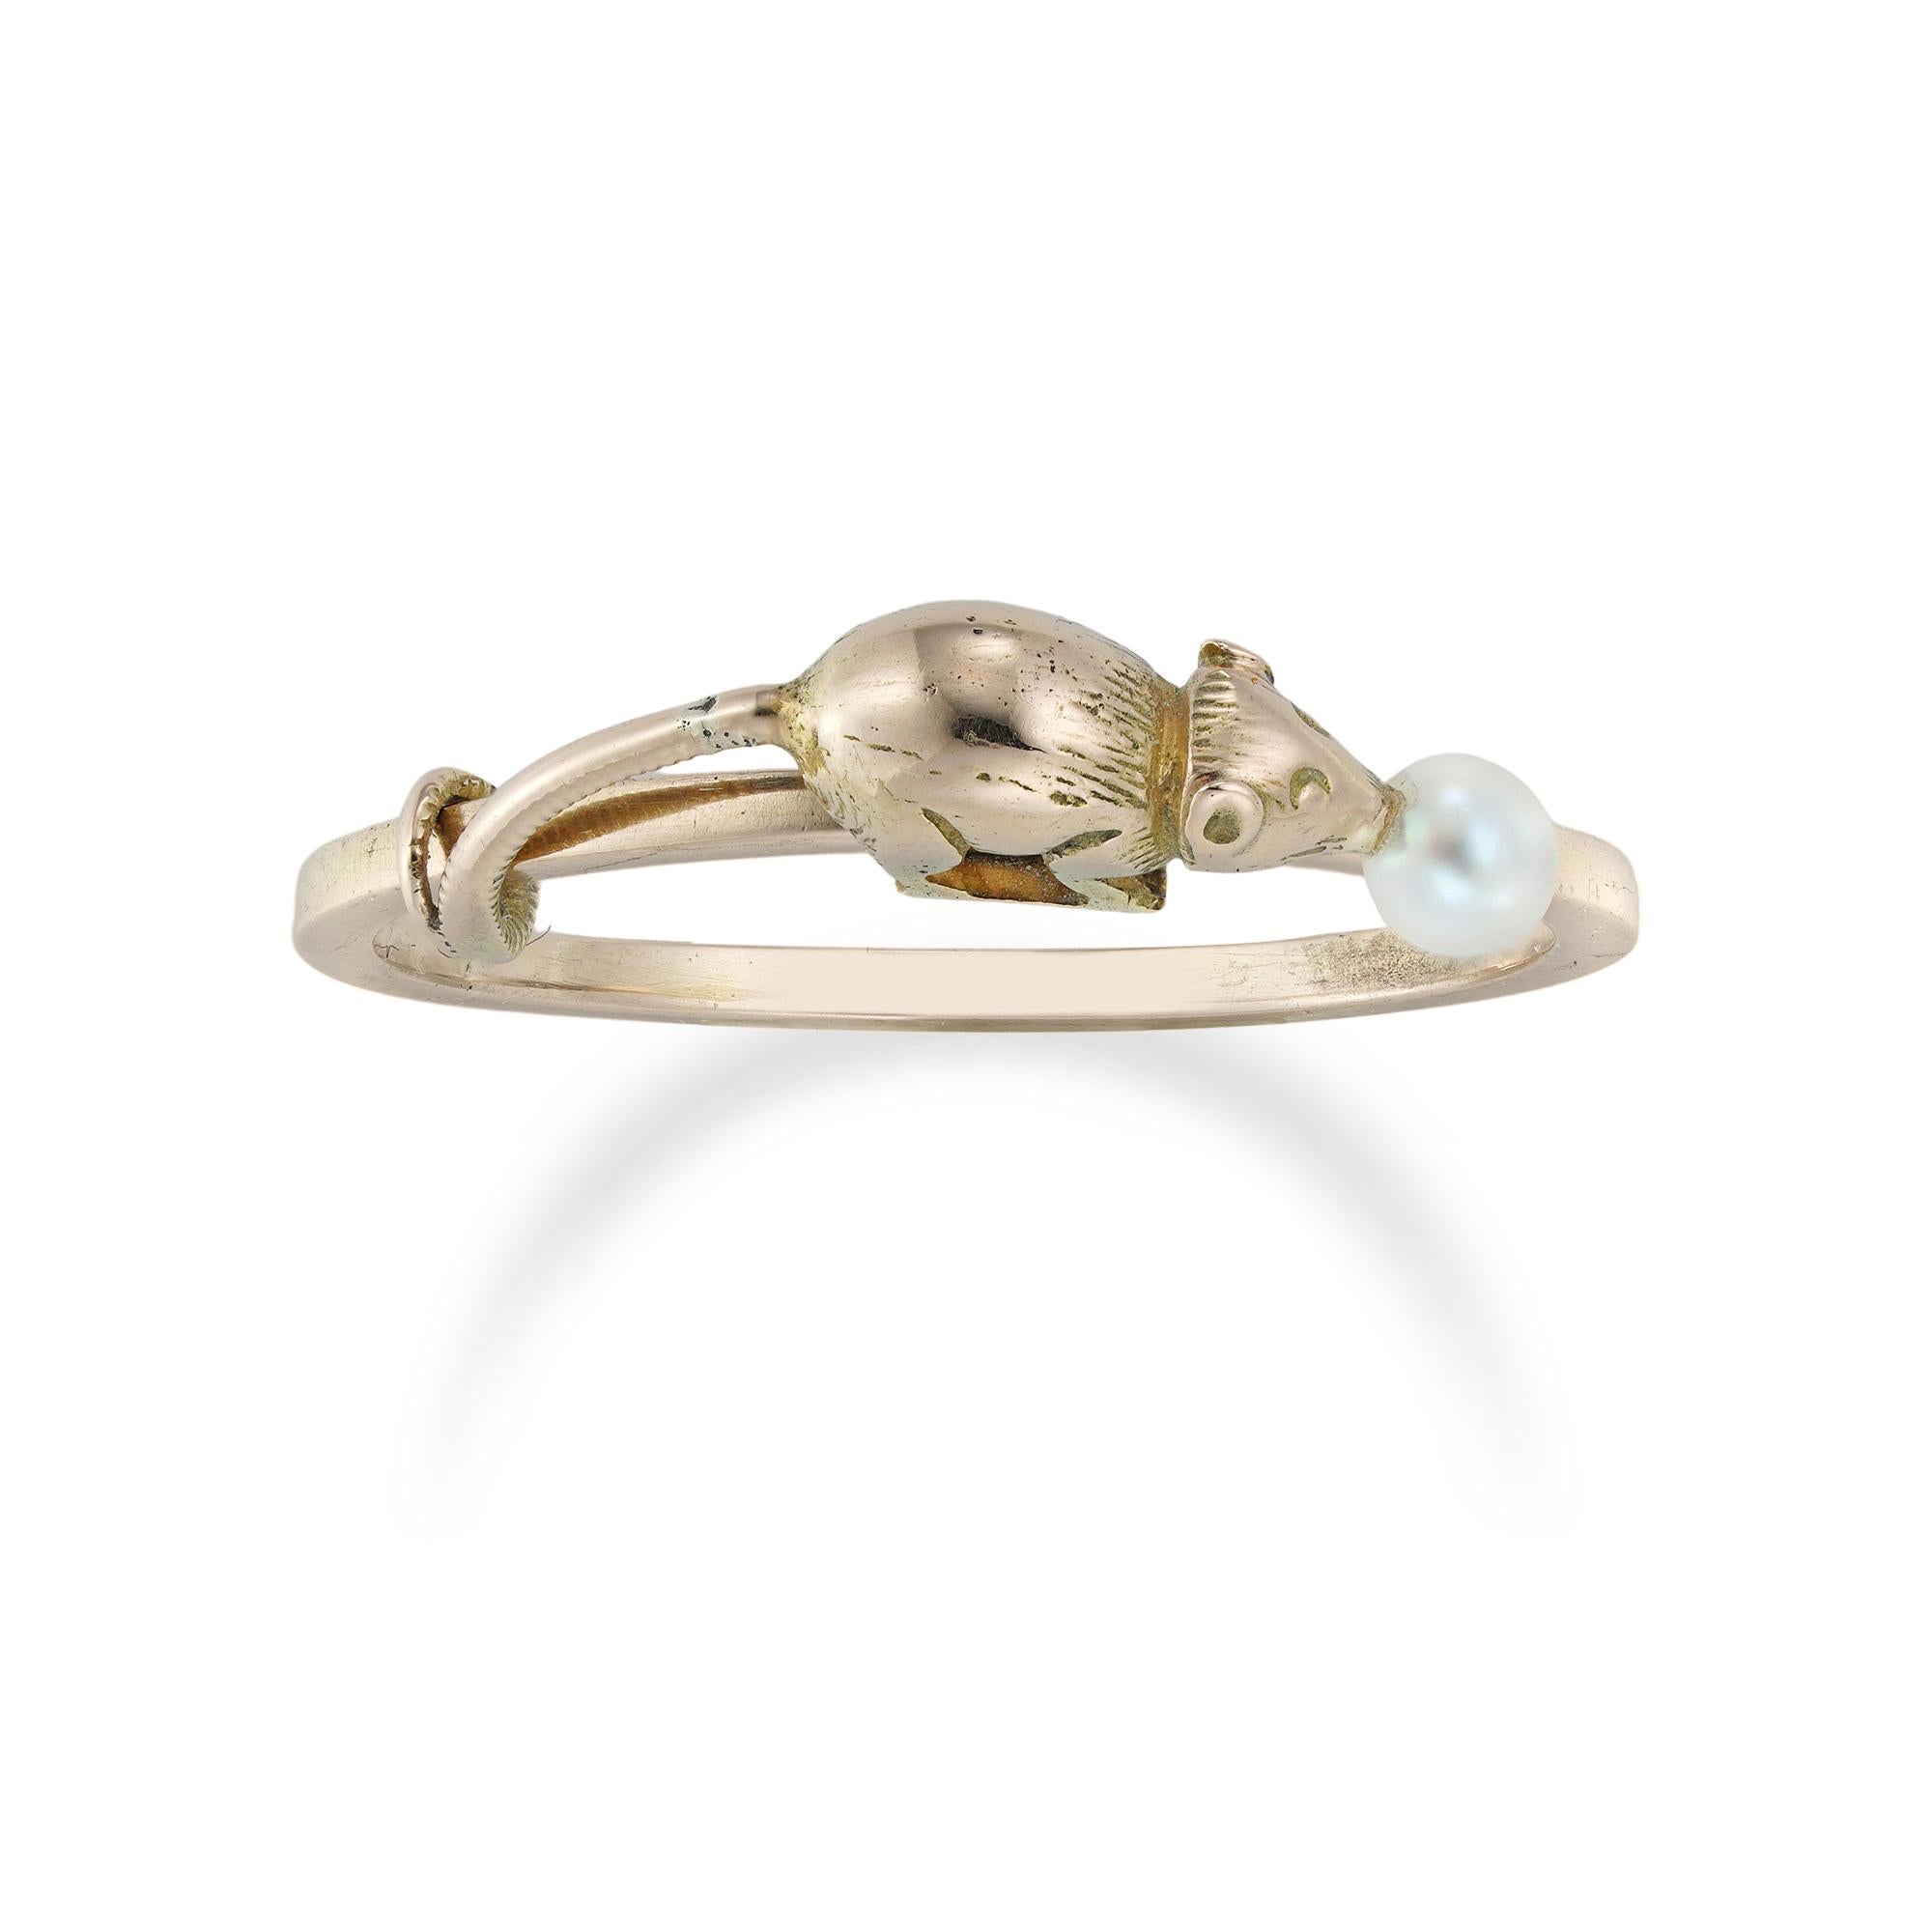 A mouse and cheese ring, the gold mouse with a pearl in its mouth in the form of a crumb of cheese, having its tale coiled round a ring, bearing indistinct continental marks, circa 1880, the mouse measuring approximately 1.3cm, finger size of the